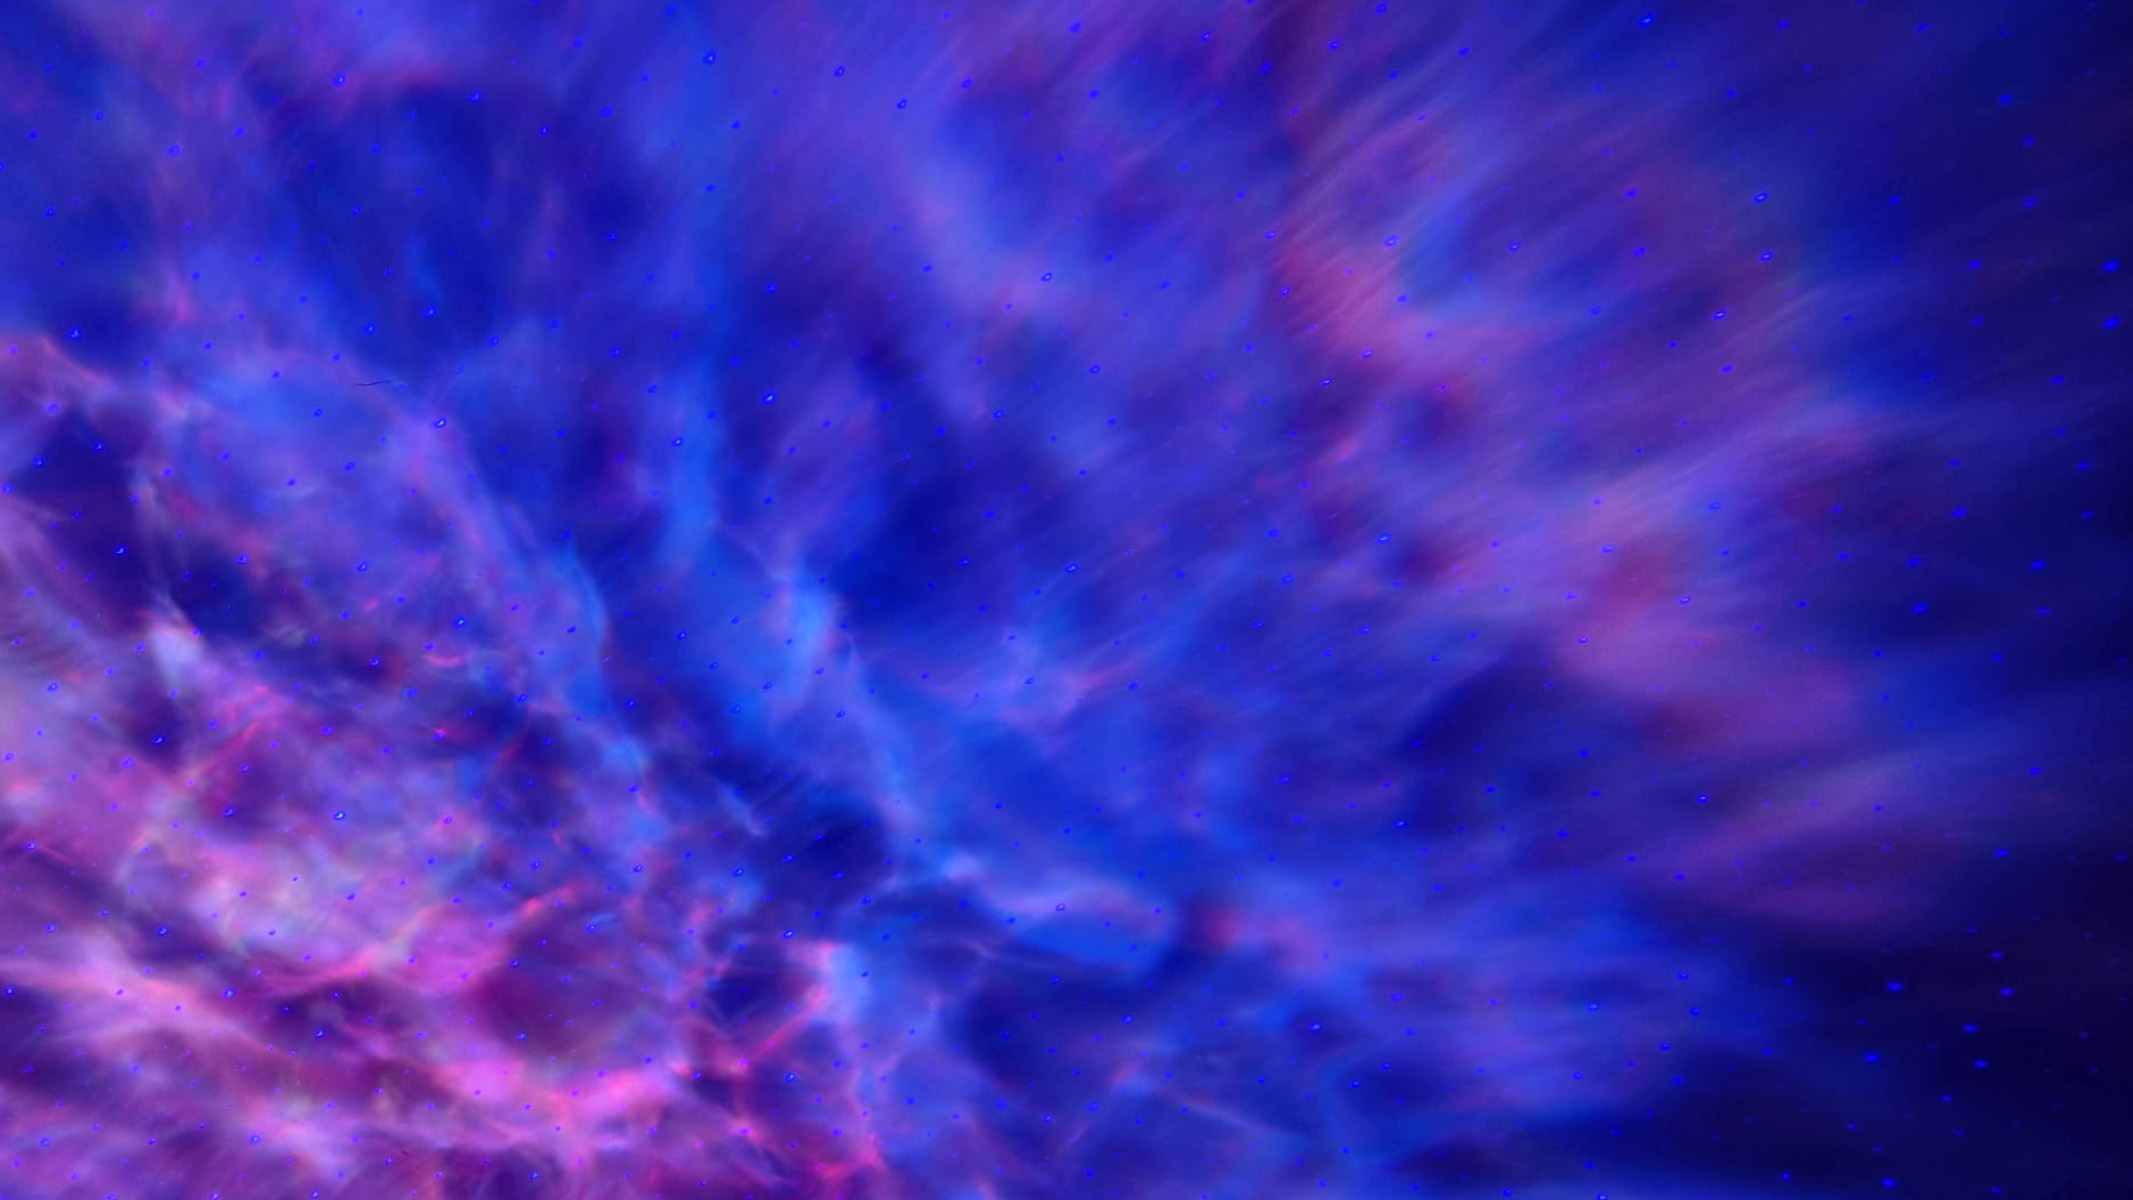 A photo of a nebula projection featuring deep blues, purples, pinks and white.